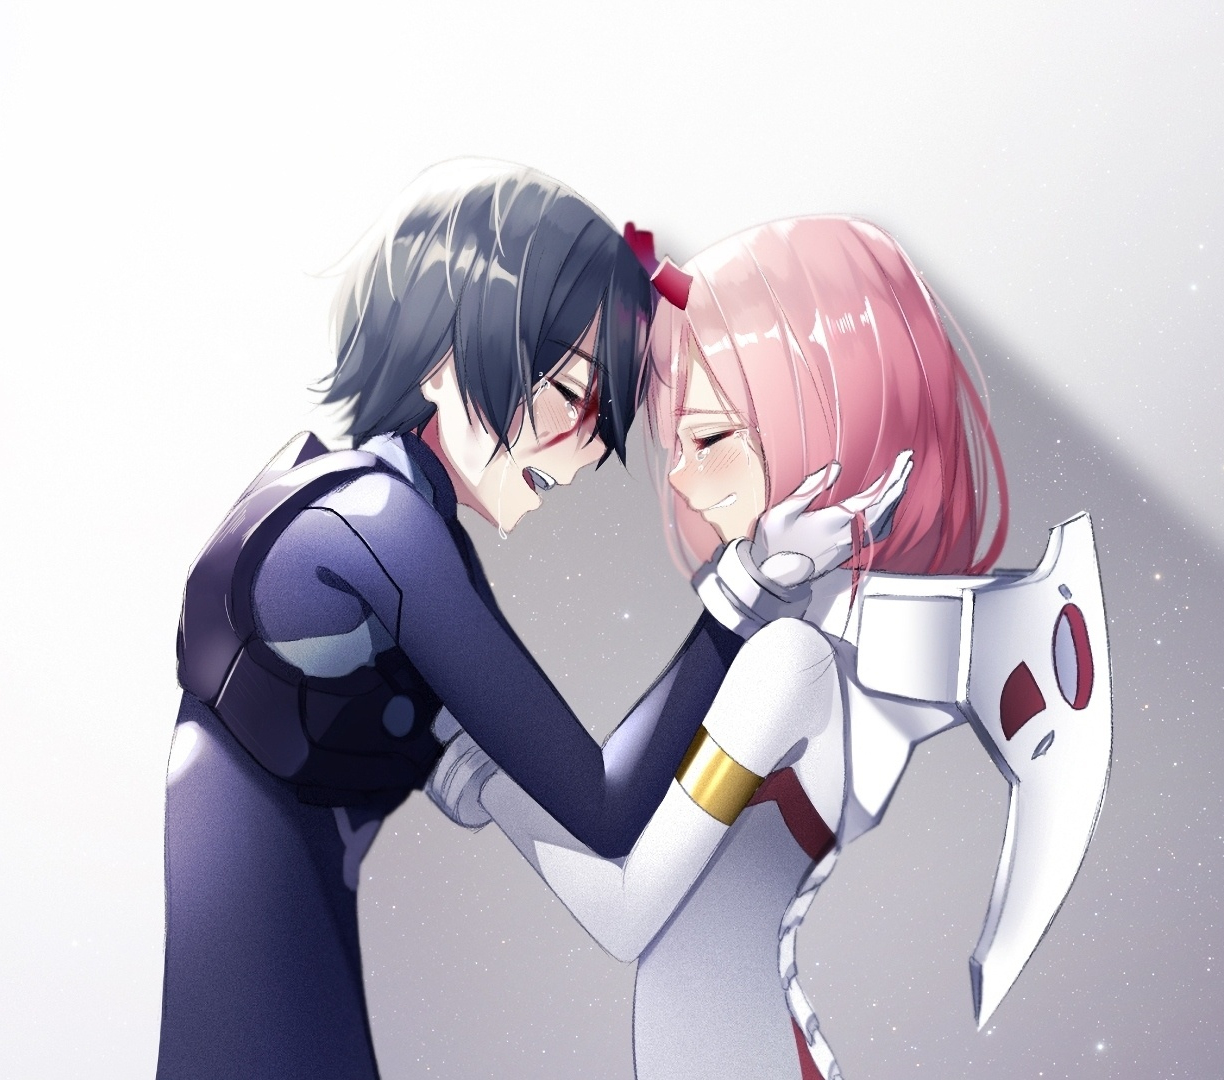 Wallpaper zero two and hiro, anime, couple desktop wallpaper, hd image,  picture, background, 54f56d | wallpapersmug